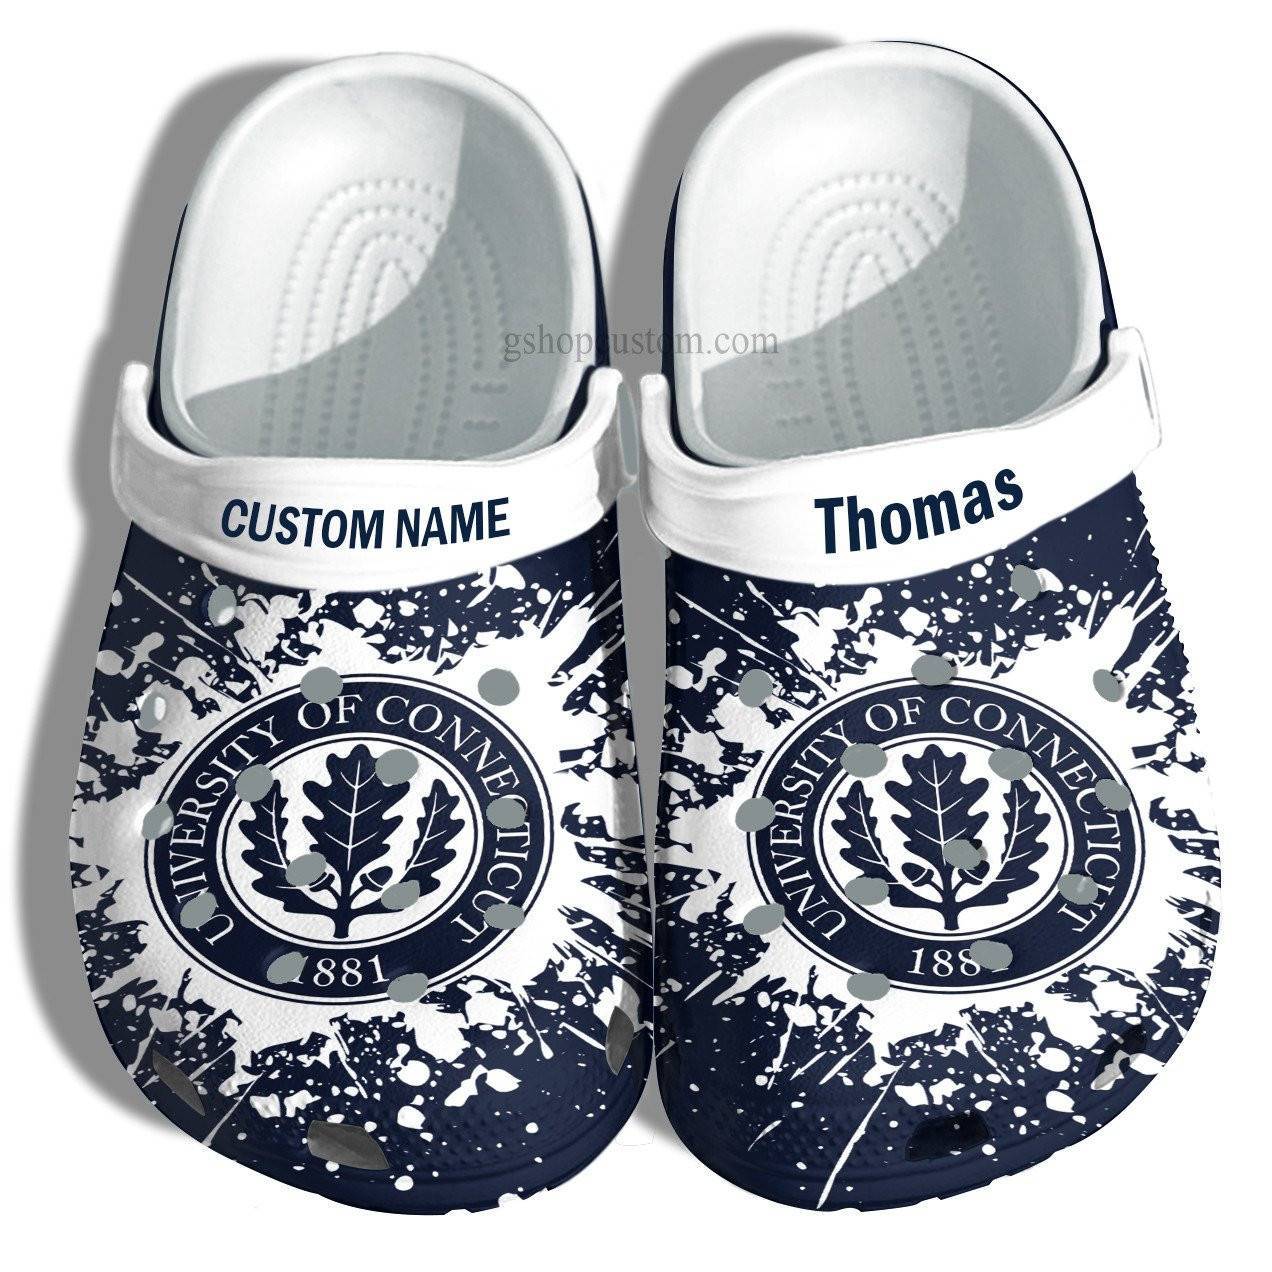 University Of Connecticut Graduation Gifts Croc Shoes Customize – Admission Gift Crocss Shoes